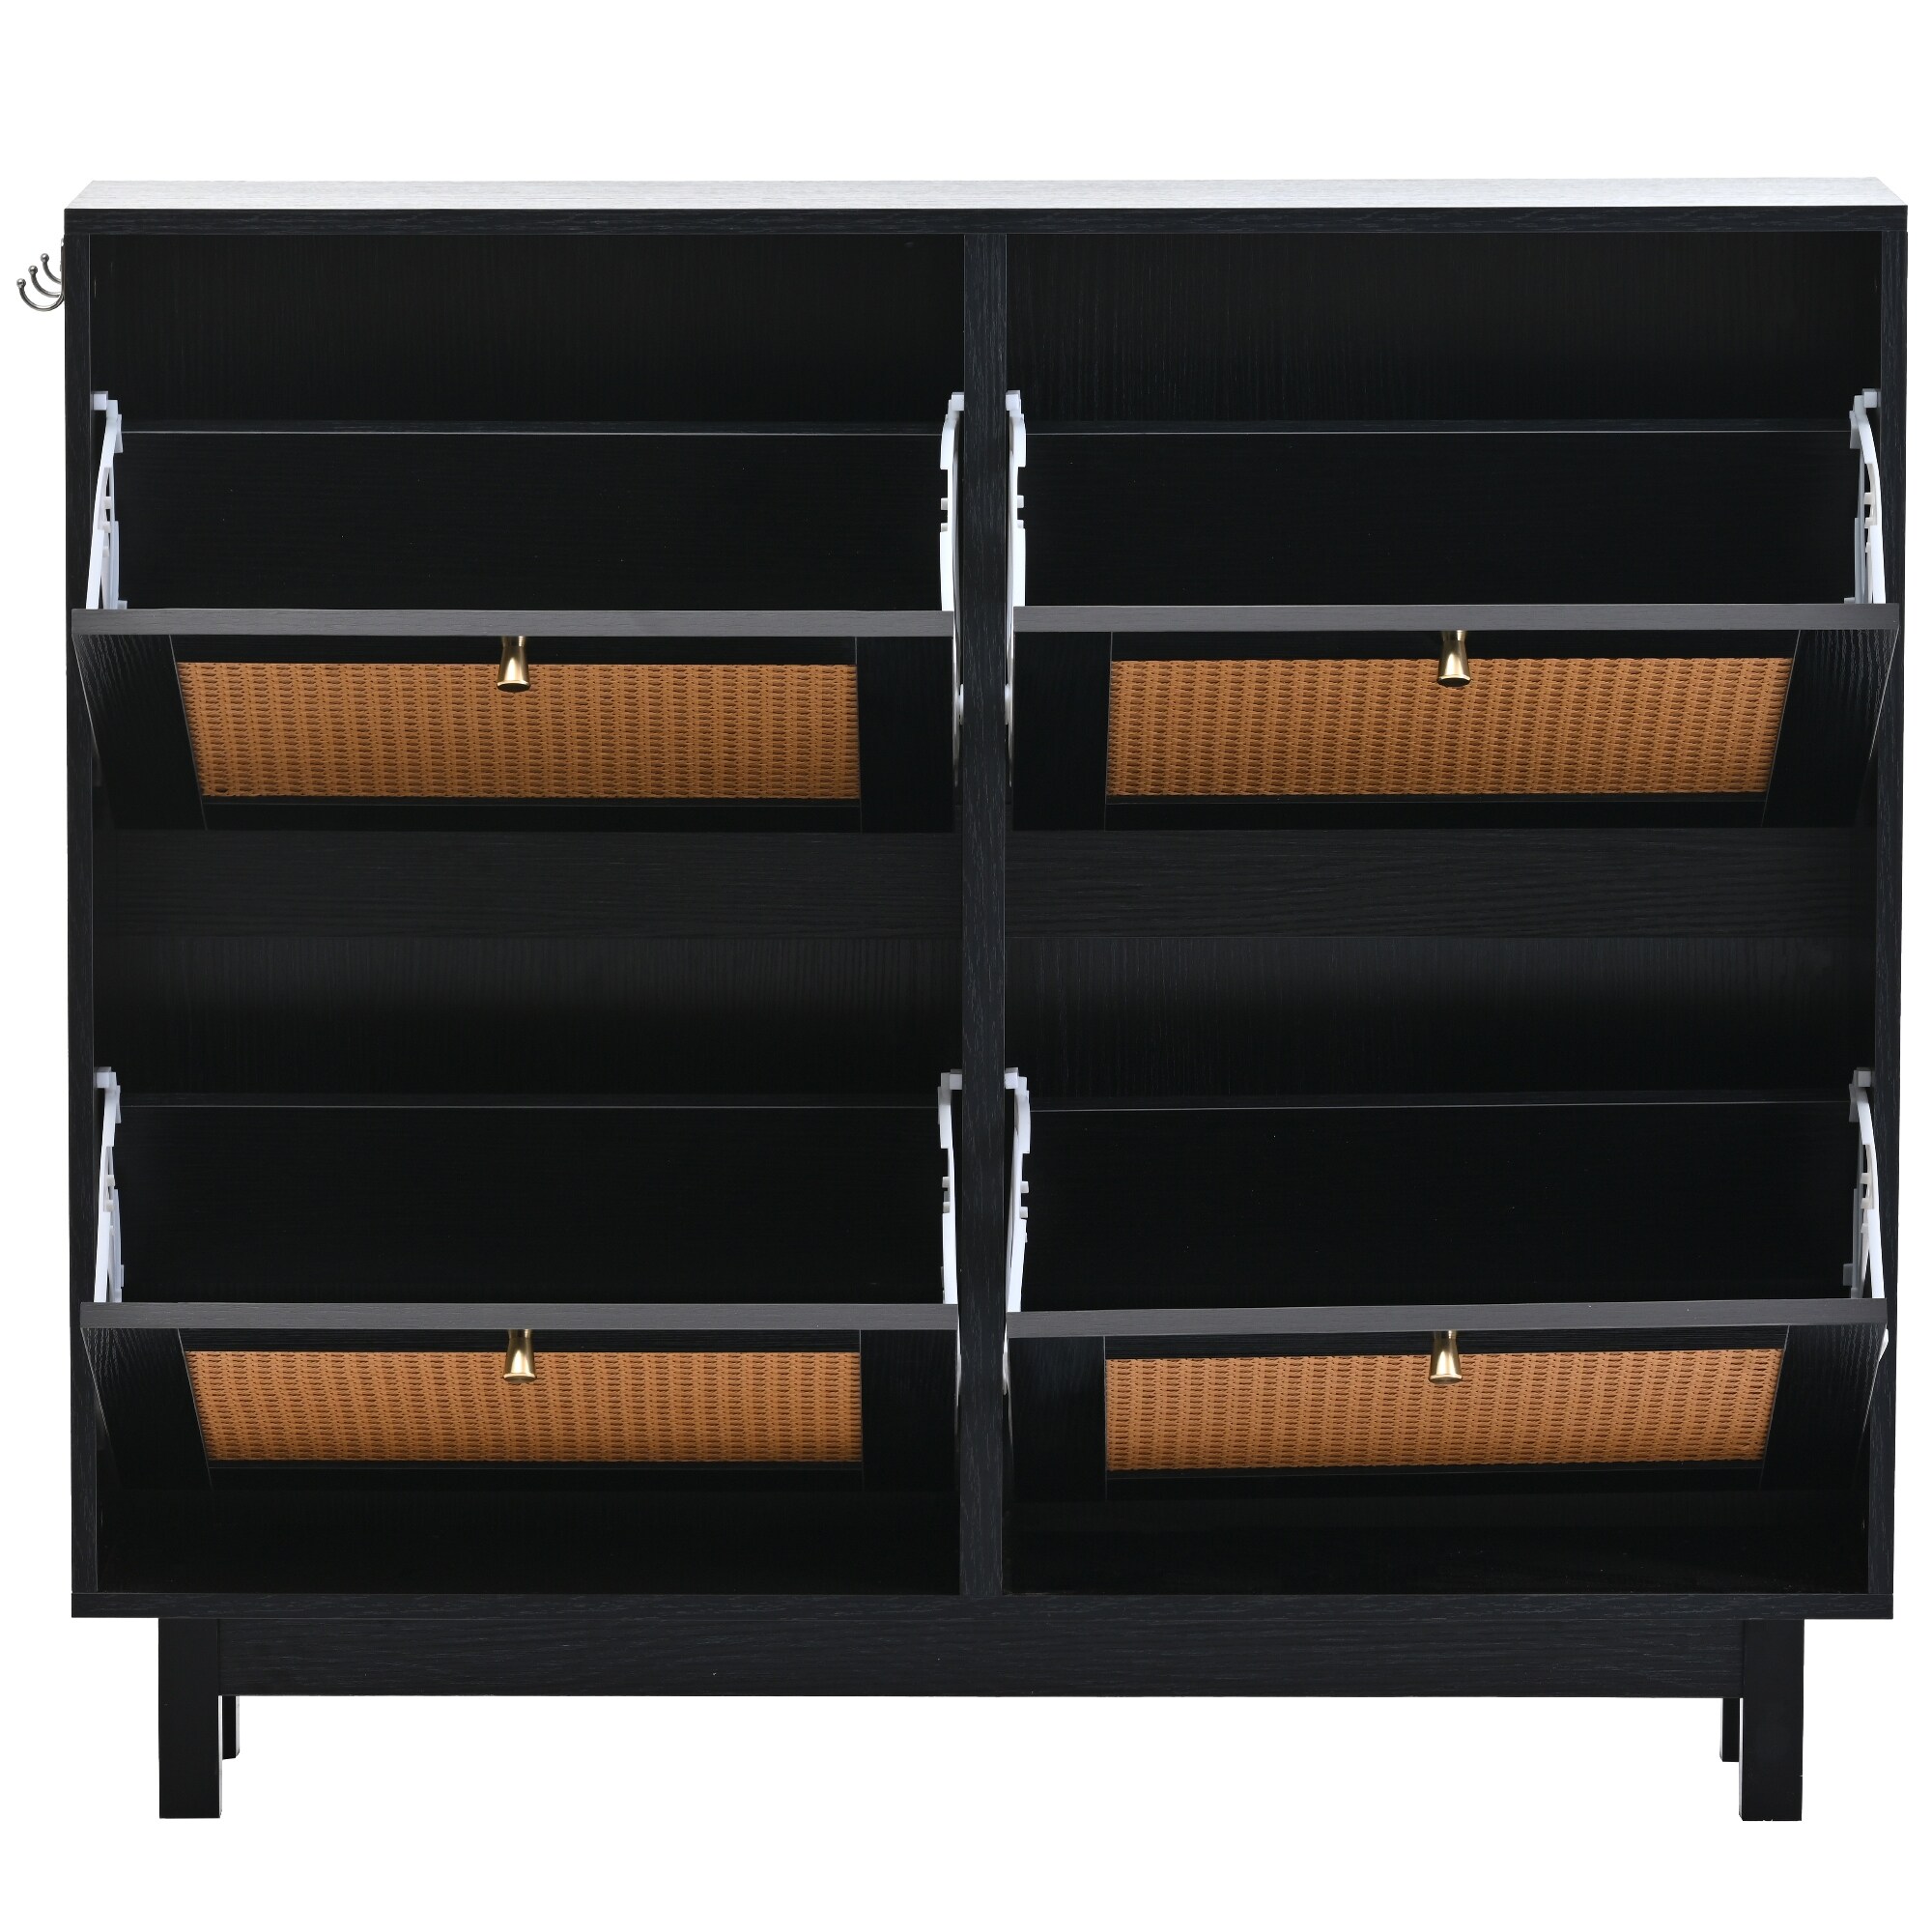 https://ak1.ostkcdn.com/images/products/is/images/direct/79ffe0d4b6319ab99761efb99537b07116df51a7/Rattan-Shoe-Cabinet-with-4-Flip-Drawers%2C-2-Tier-Shoe-Storage-Organizer%2C-Free-Standing-Shoe-Rack.jpg